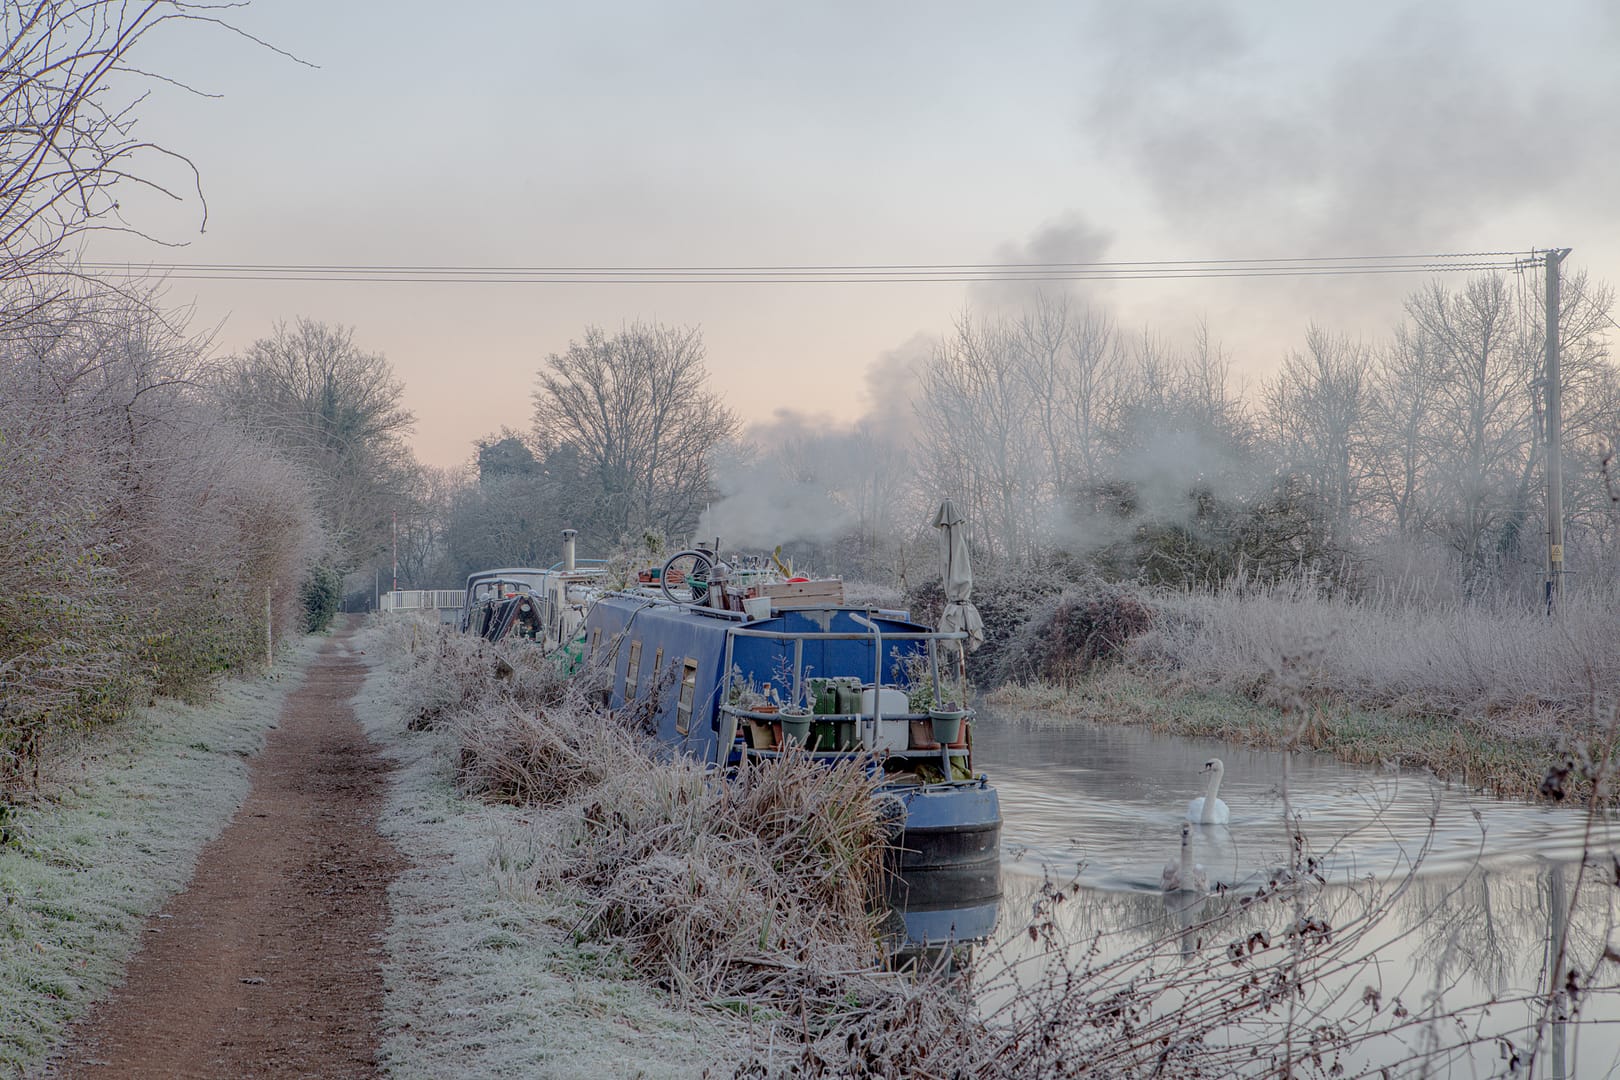 Aldermaston Wharf Winter on the Kennet and Avon Canal. Frost covers the narrow boats.